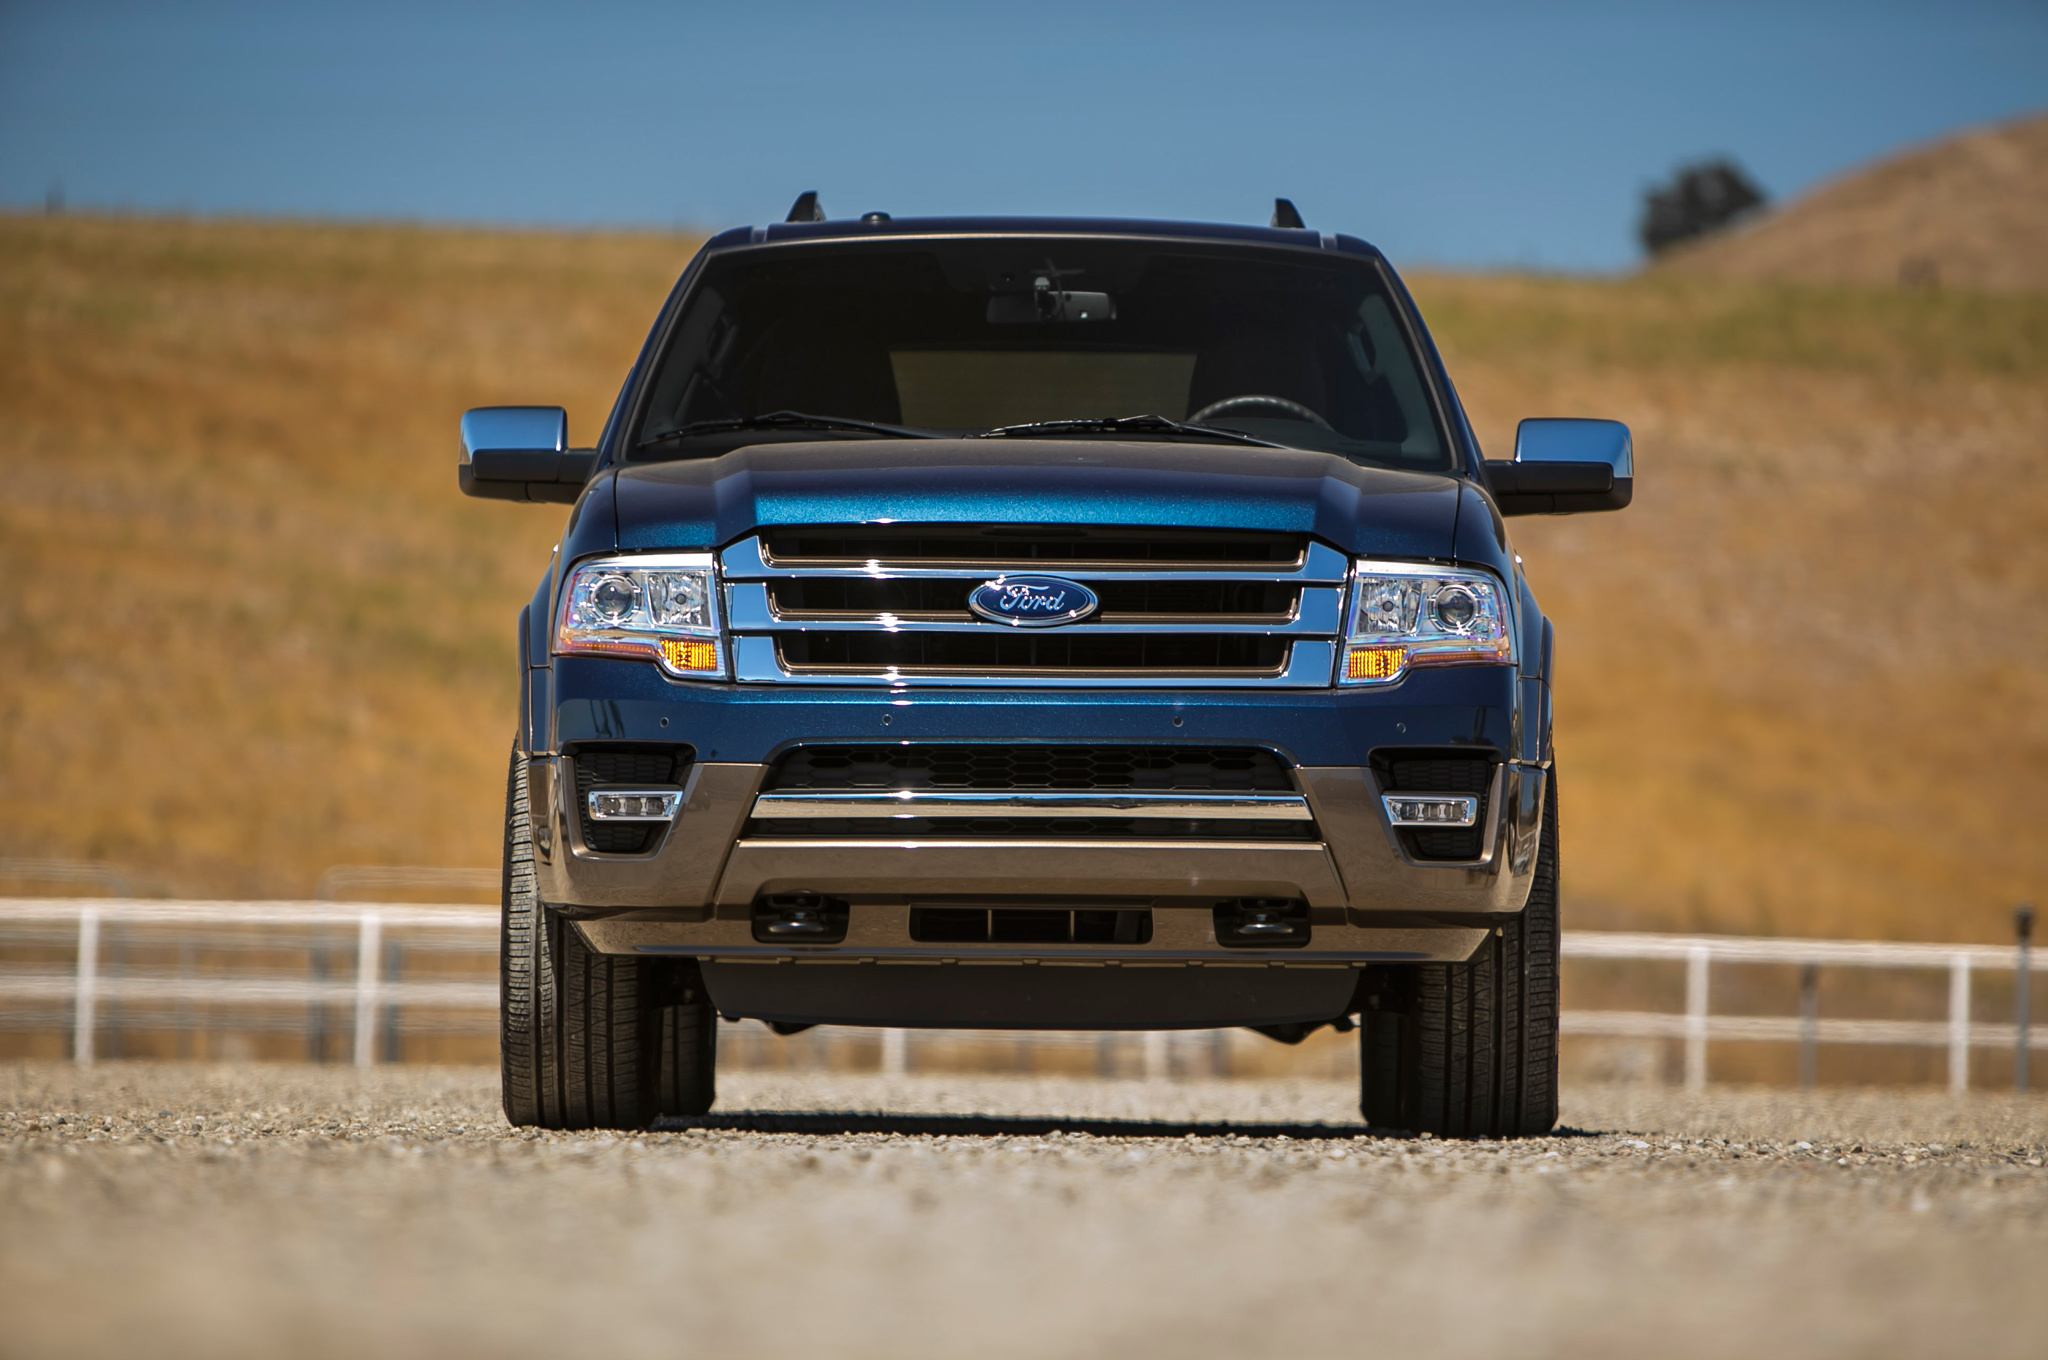 Ford Expedition, Free download 2016, Ford Expedition King Ranch, Best image, 2050x1360 HD Desktop